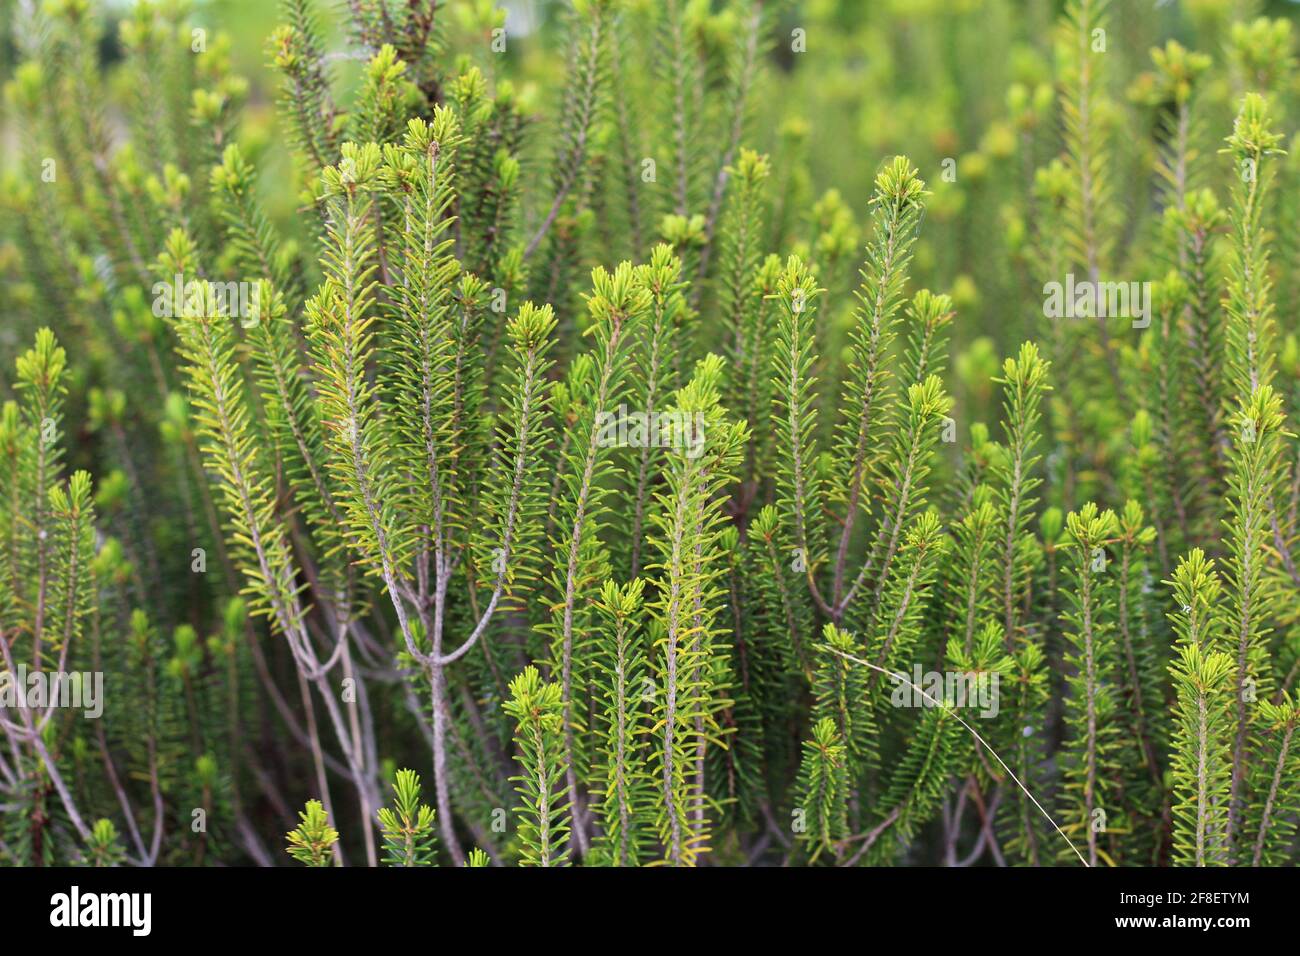 Macro shot of Sand heath, a species of ceratiola also known as sandhill rosemary or Florida rosemary growing in a field. Stock Photo